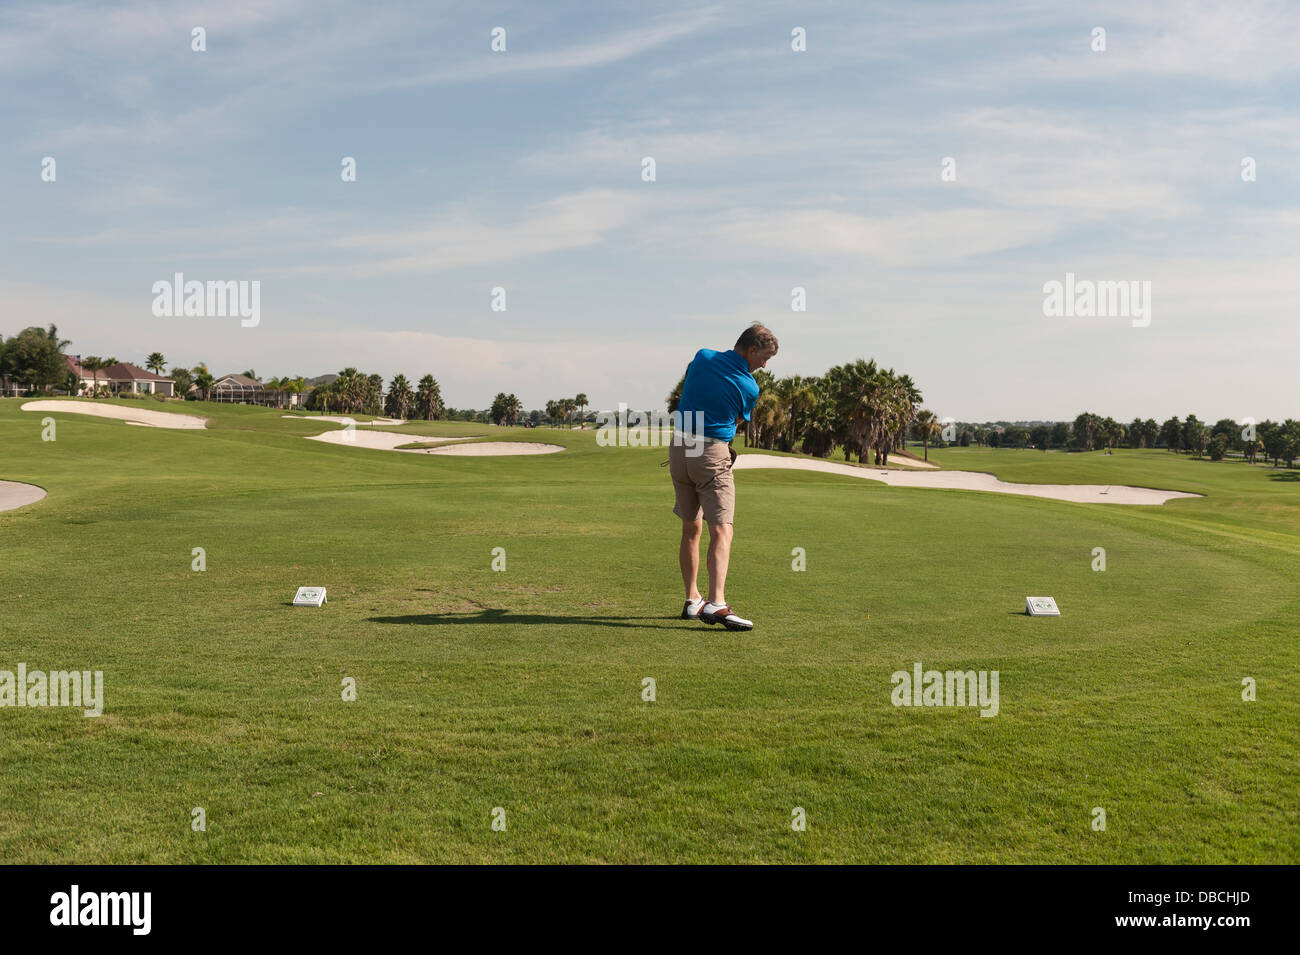 A man golfing on the Amelia course at the Mallory Hill Country Club in The Villages, Florida. An  adult retirement community. Stock Photo